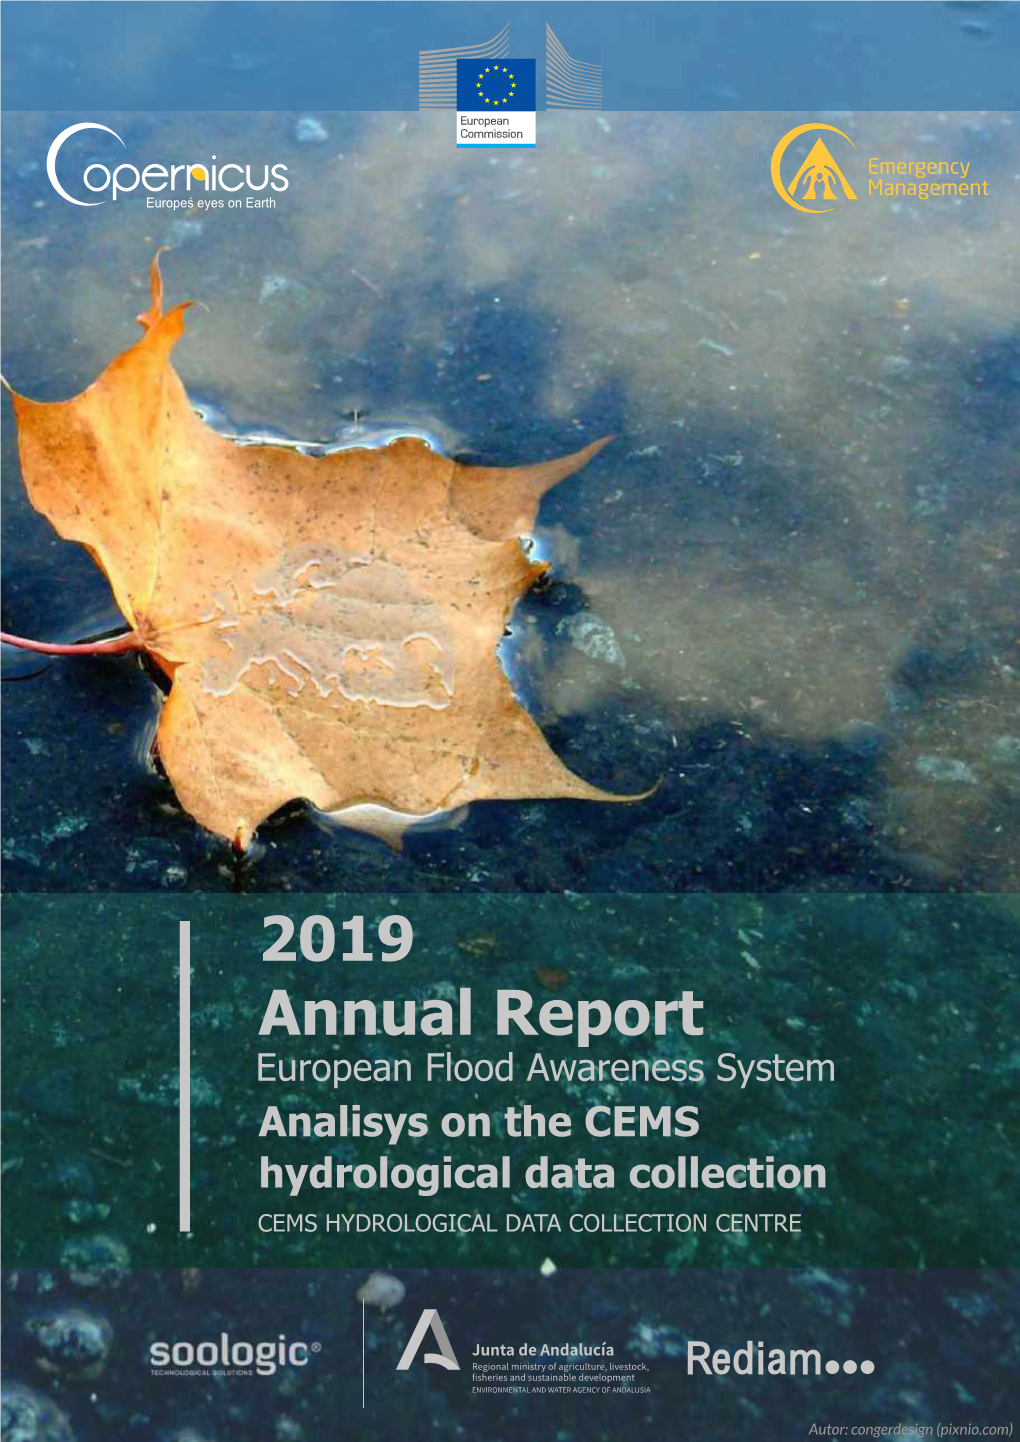 2019 Annual Report European Flood Awareness System Analisys on the CEMS Hydrological Data Collection CEMS HYDROLOGICAL DATA COLLECTION CENTRE